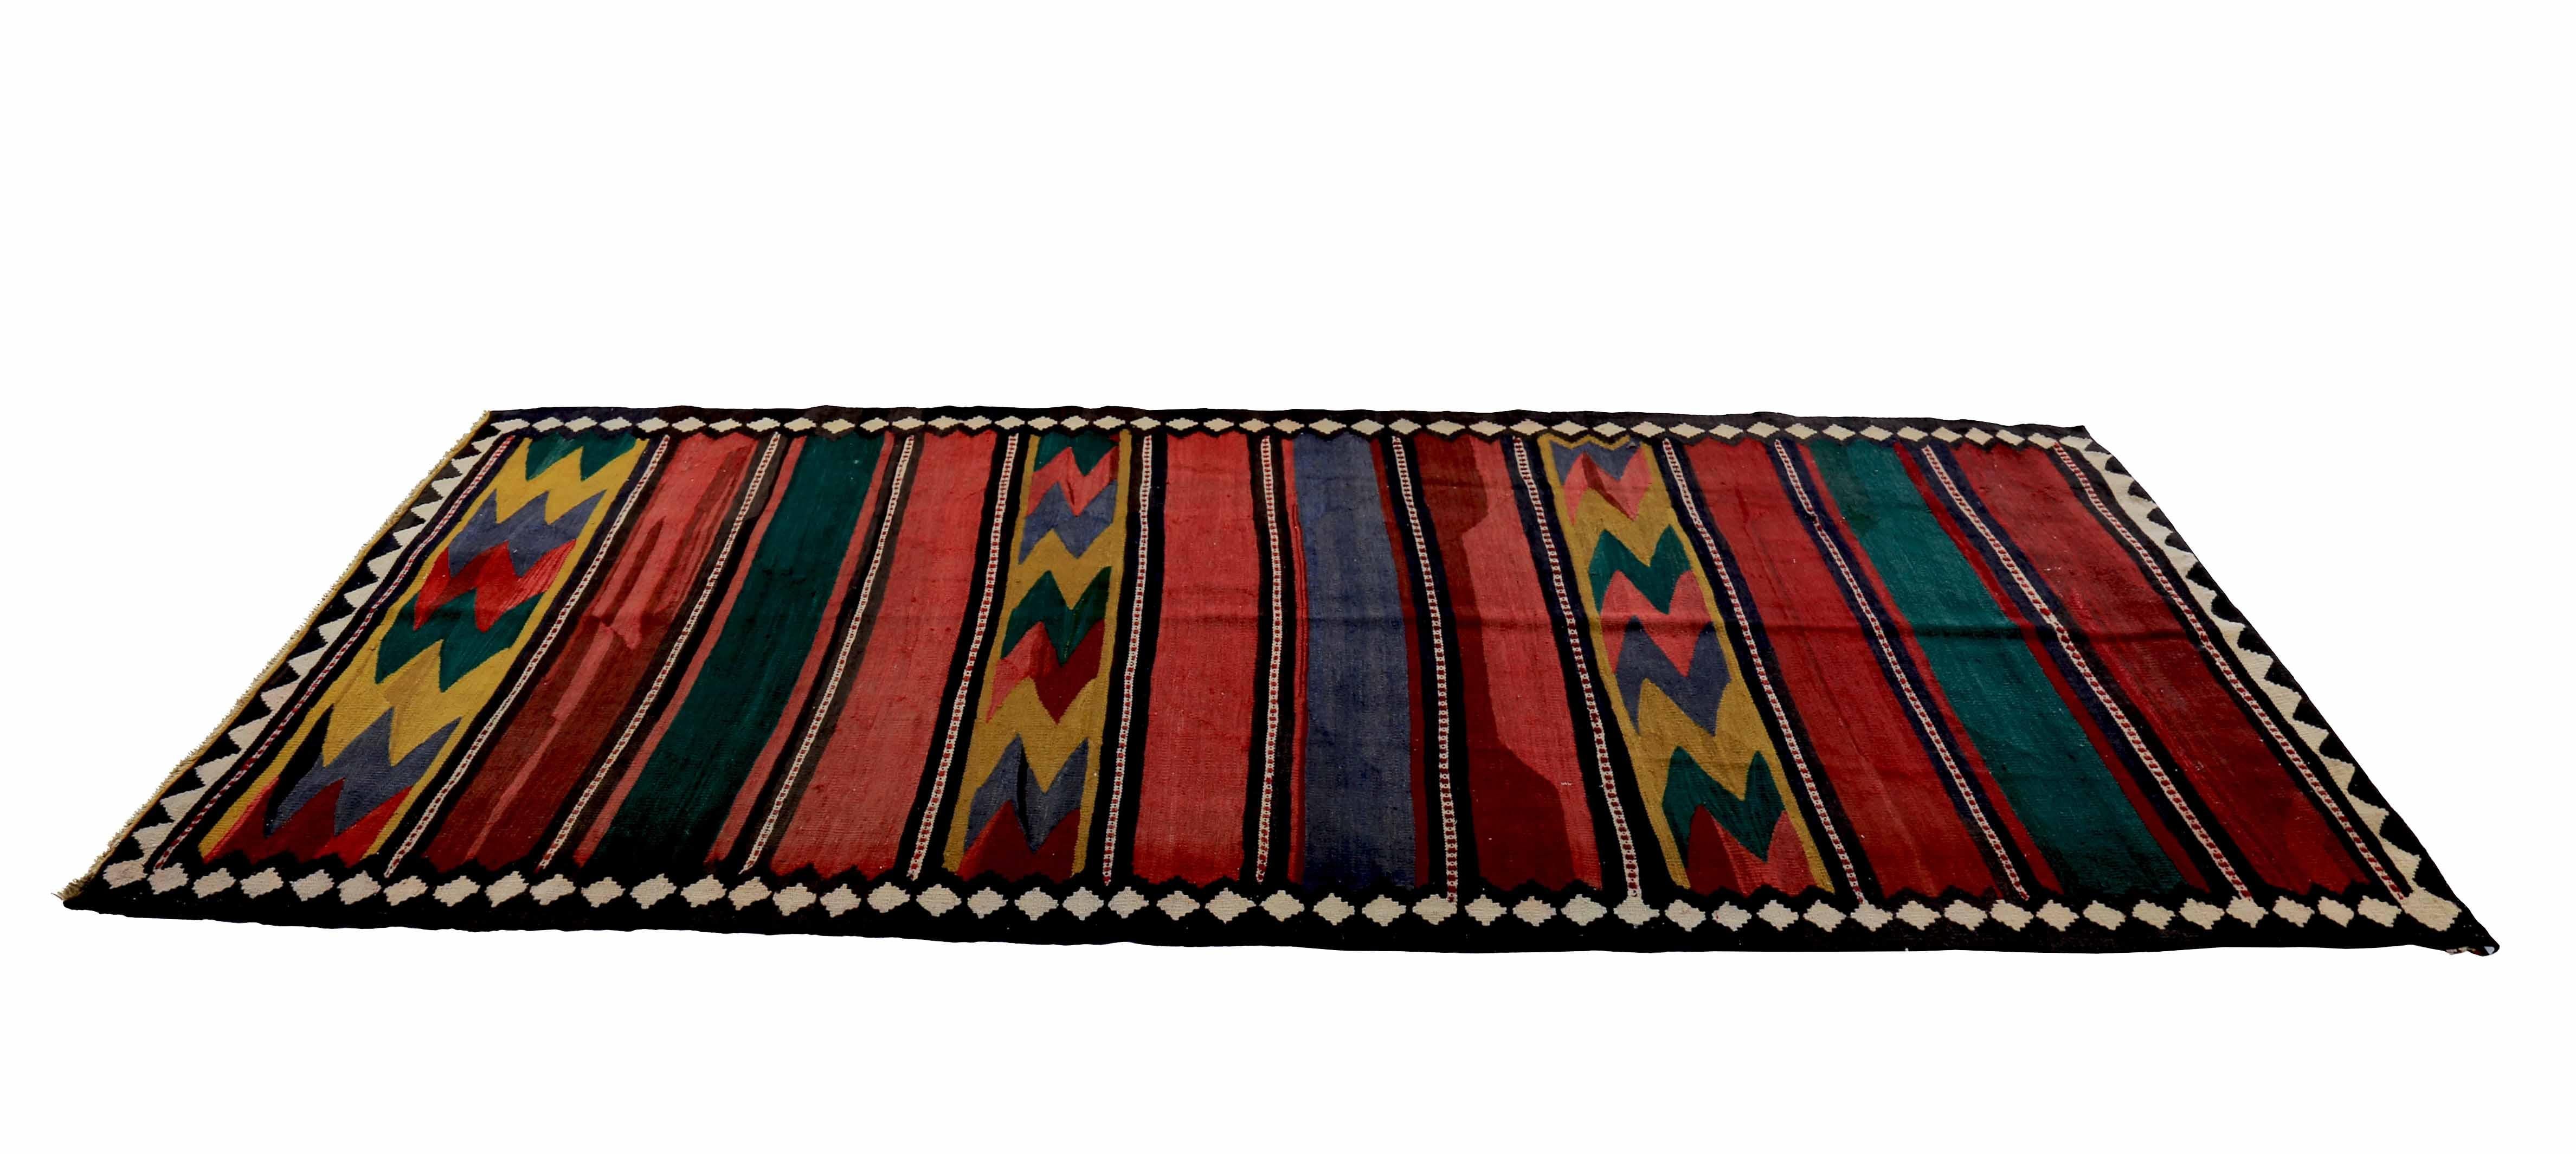 Modern Turkish rug handwoven from the finest sheep’s wool and colored with all-natural vegetable dyes that are safe for humans and pets. It’s a traditional Kilim flat-weave design featuring green and red tribal patterns. It’s a stunning piece to get